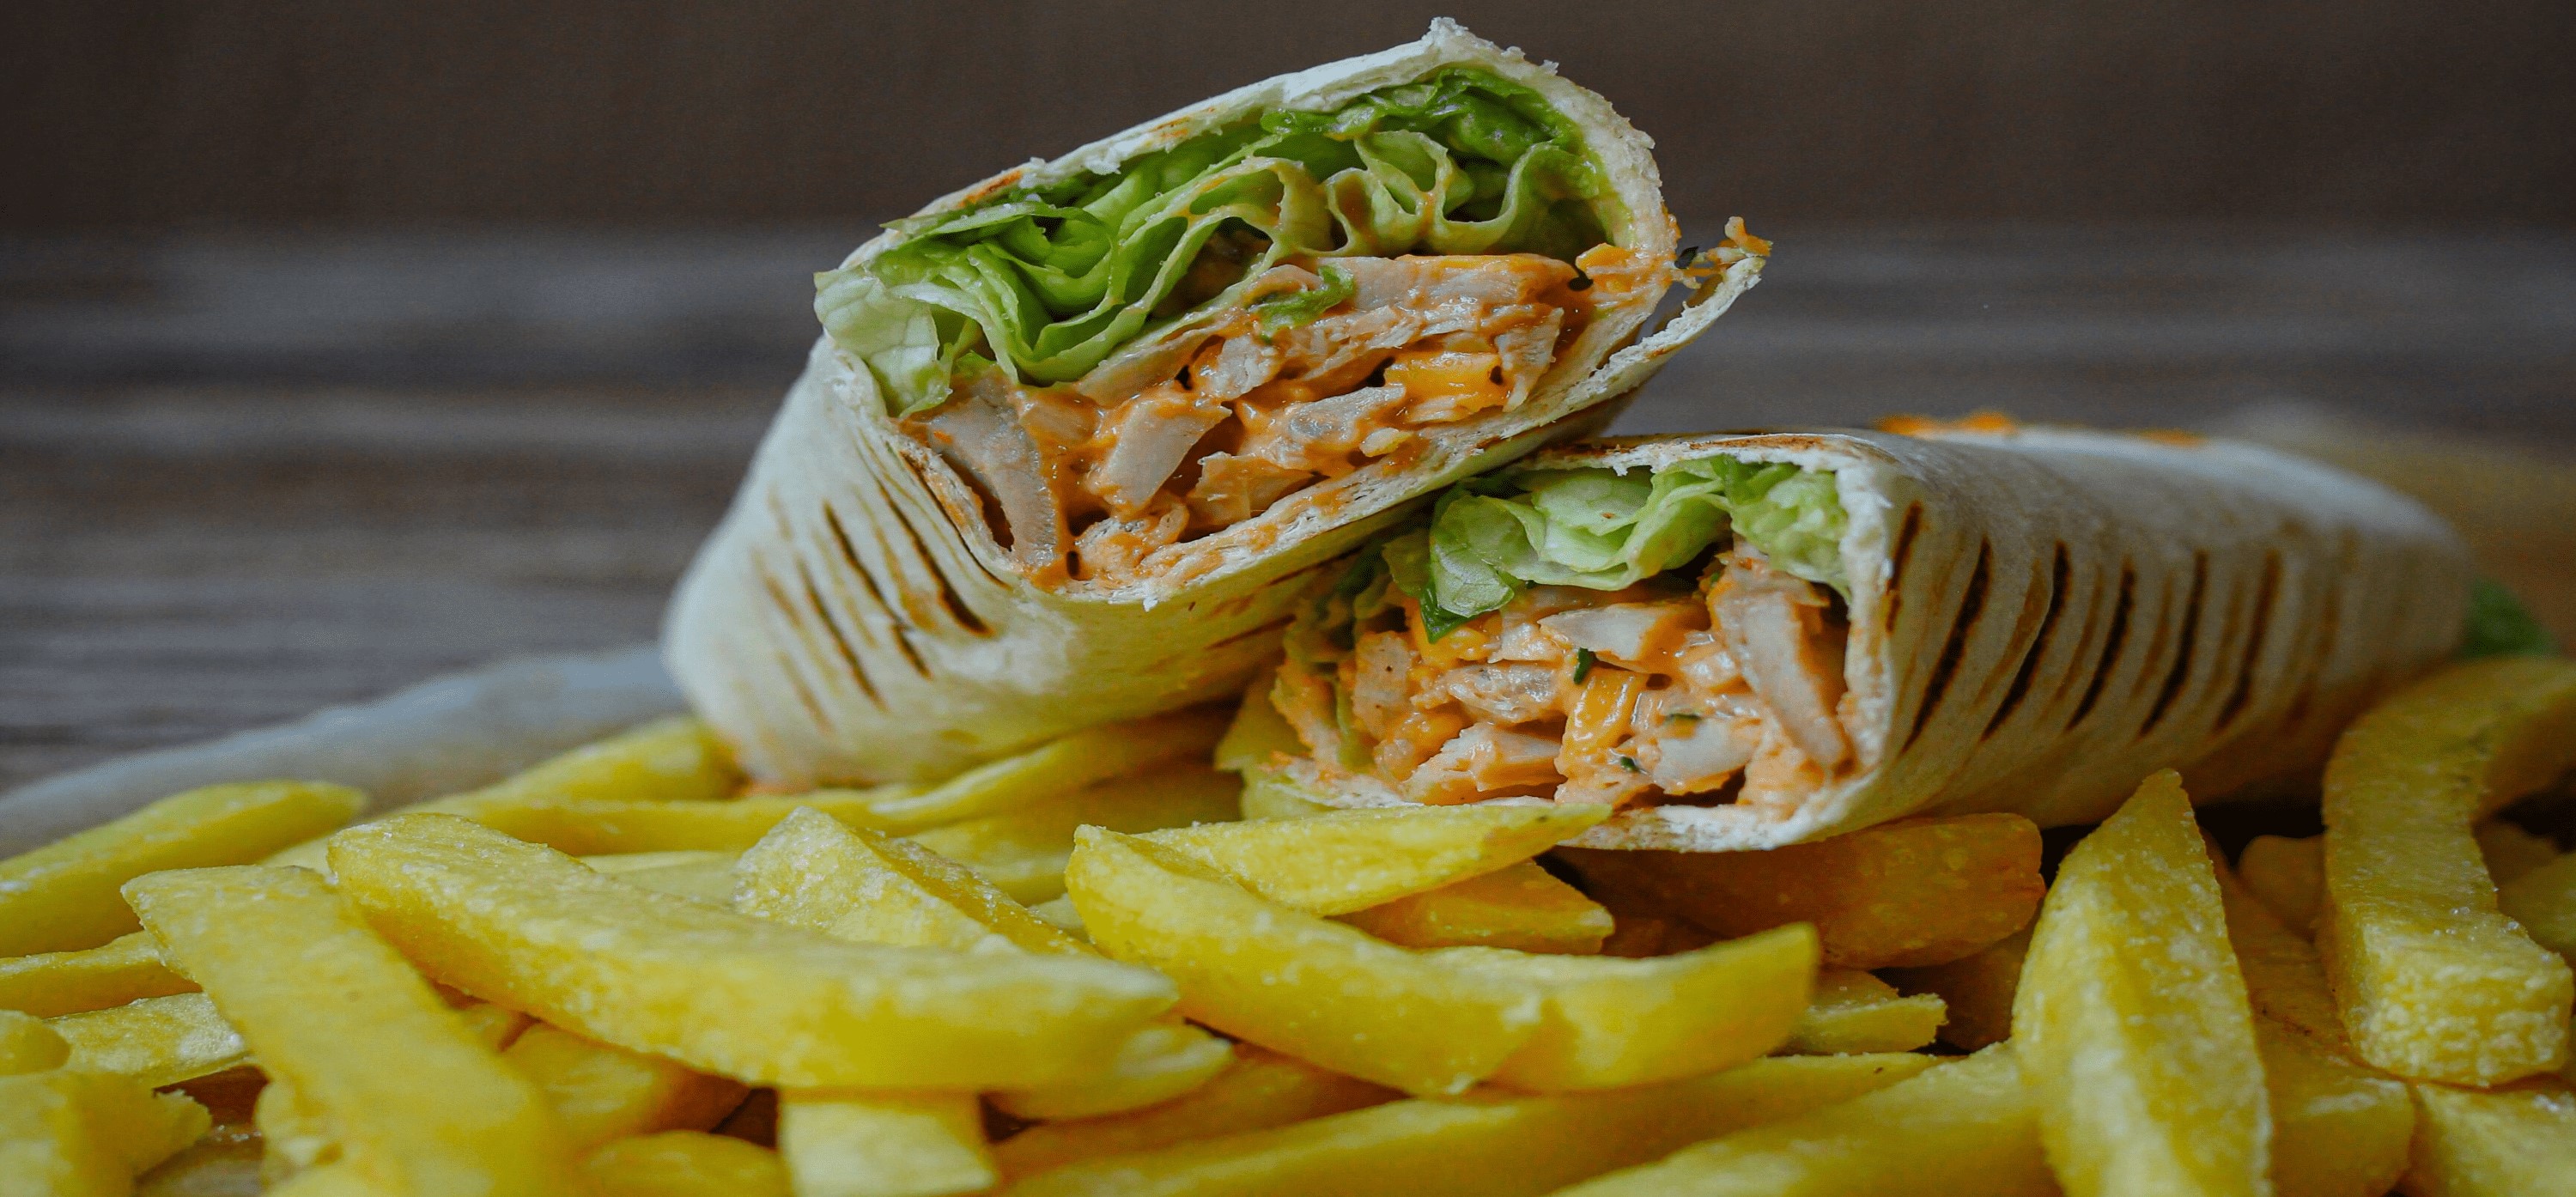 BBQ Chicken and Cheese Wraps with Chips